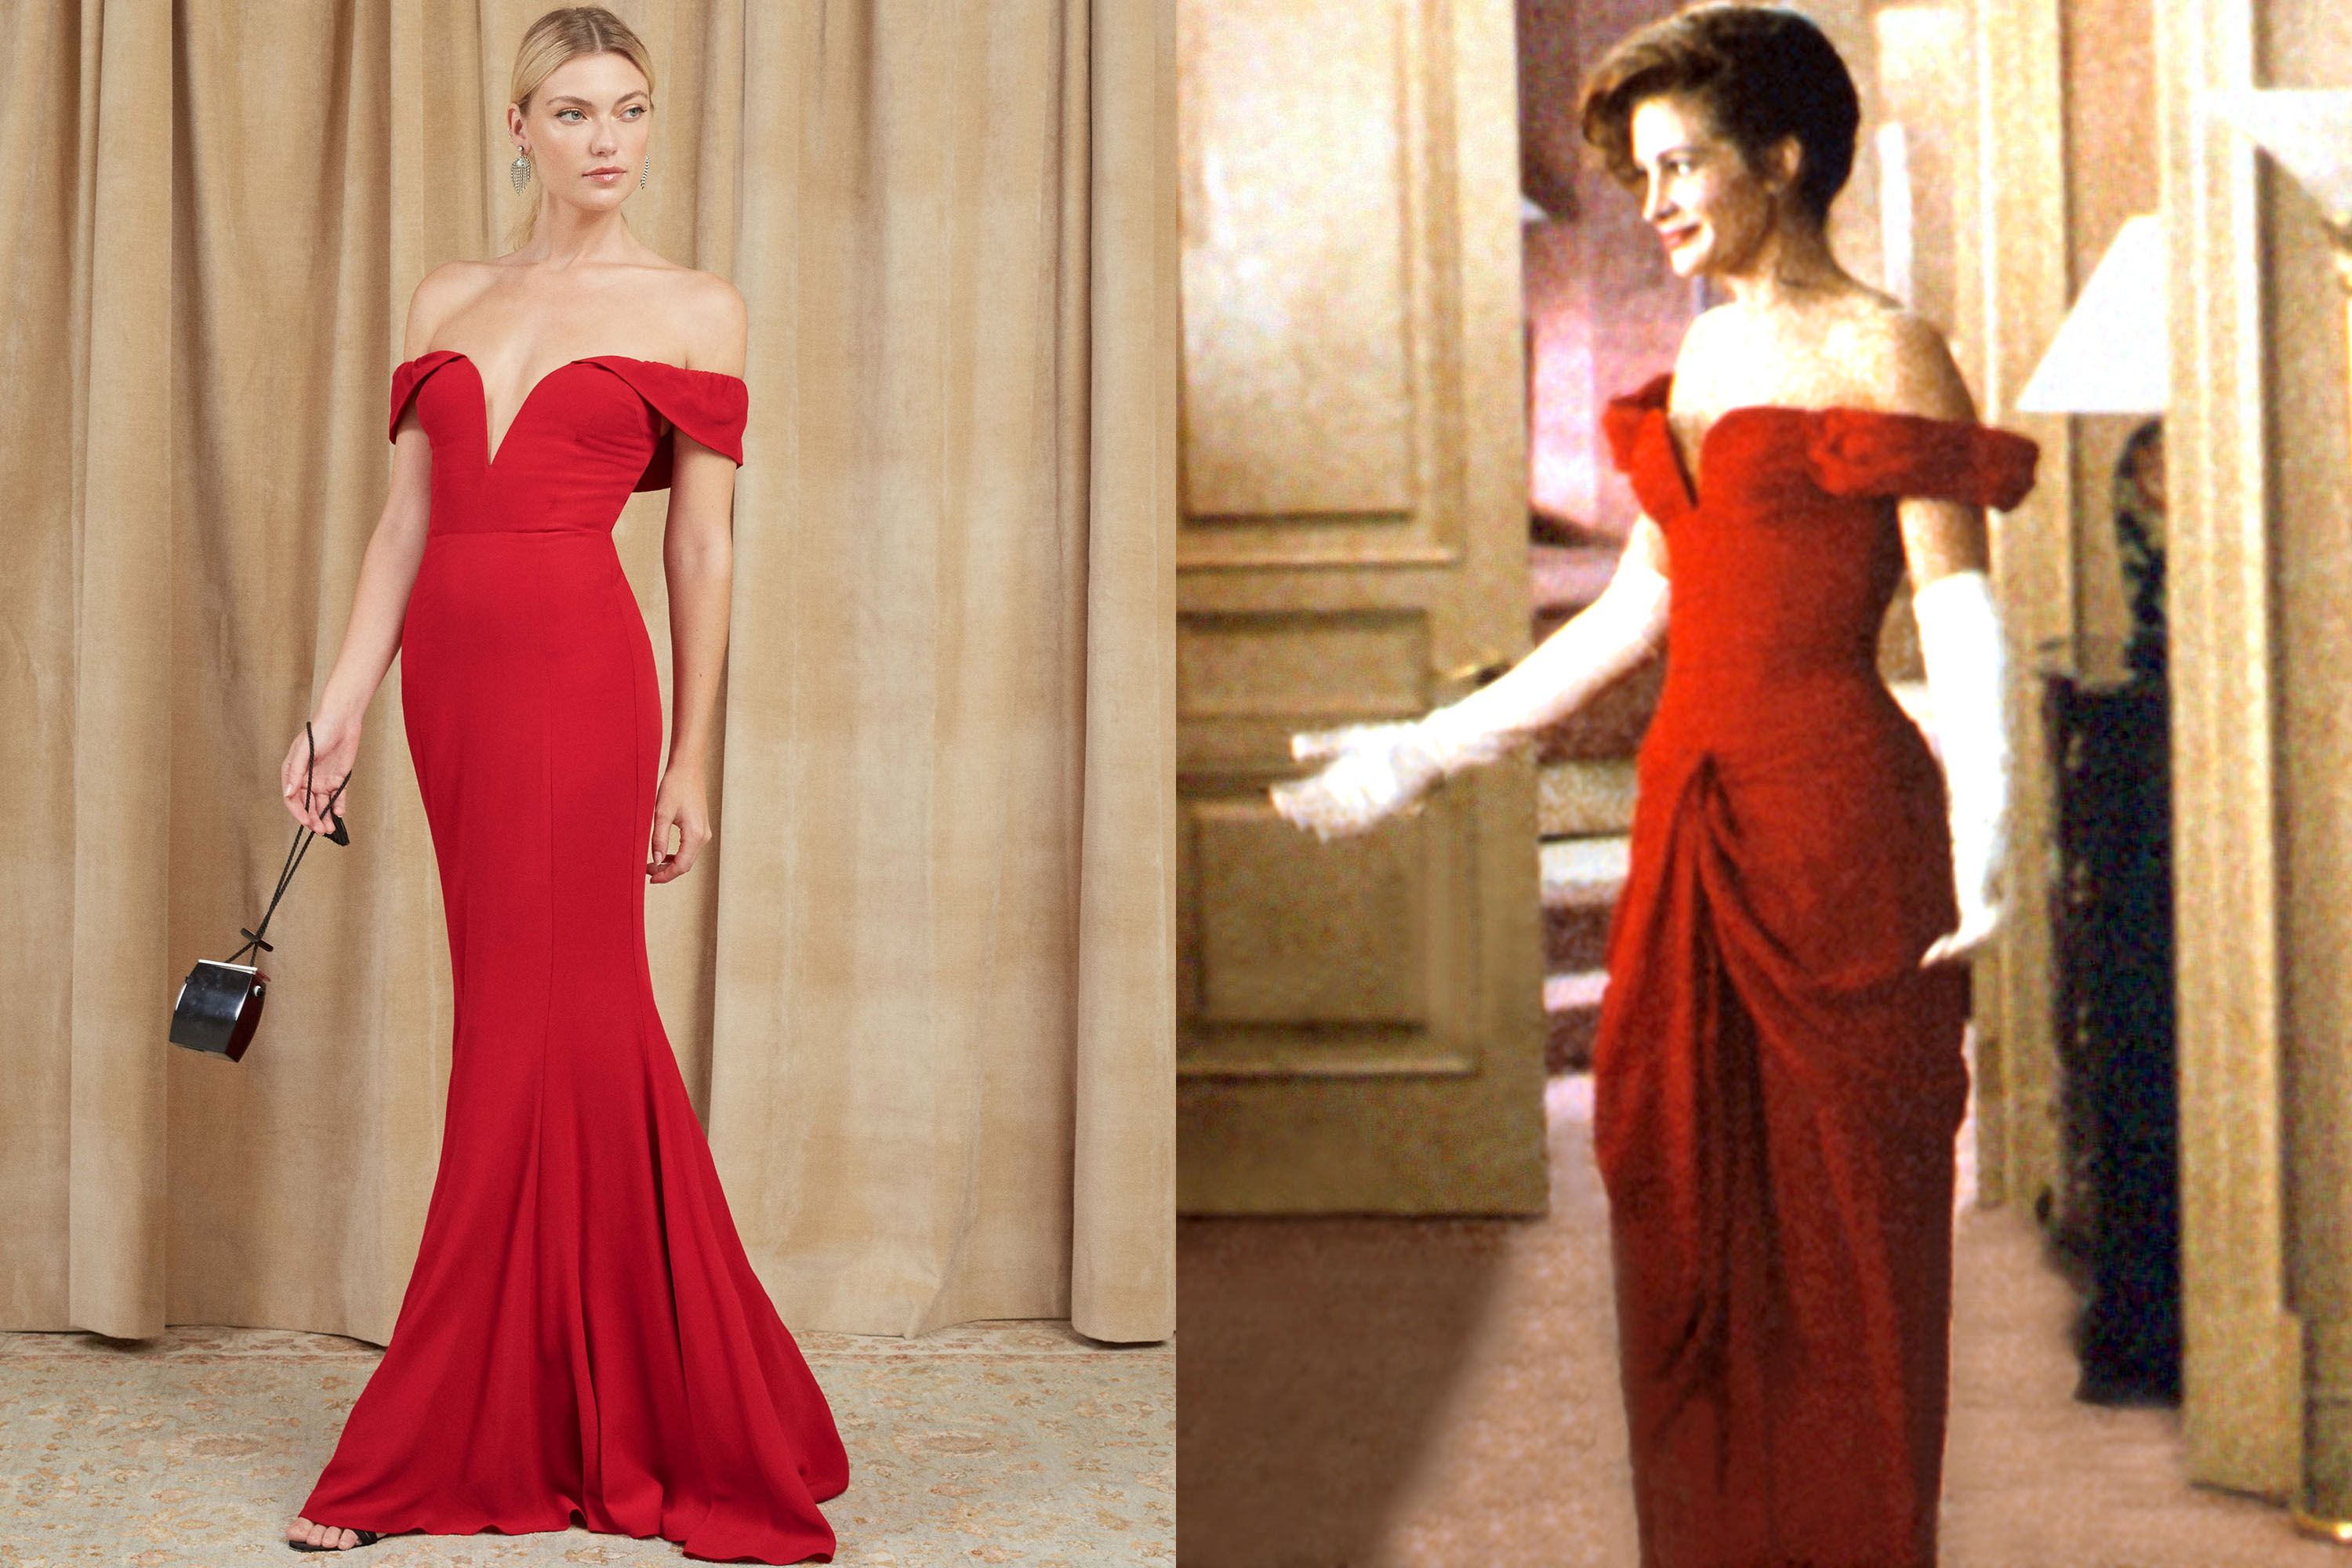 The Red 'Pretty Woman' Dress Can Now Be Yours For $388